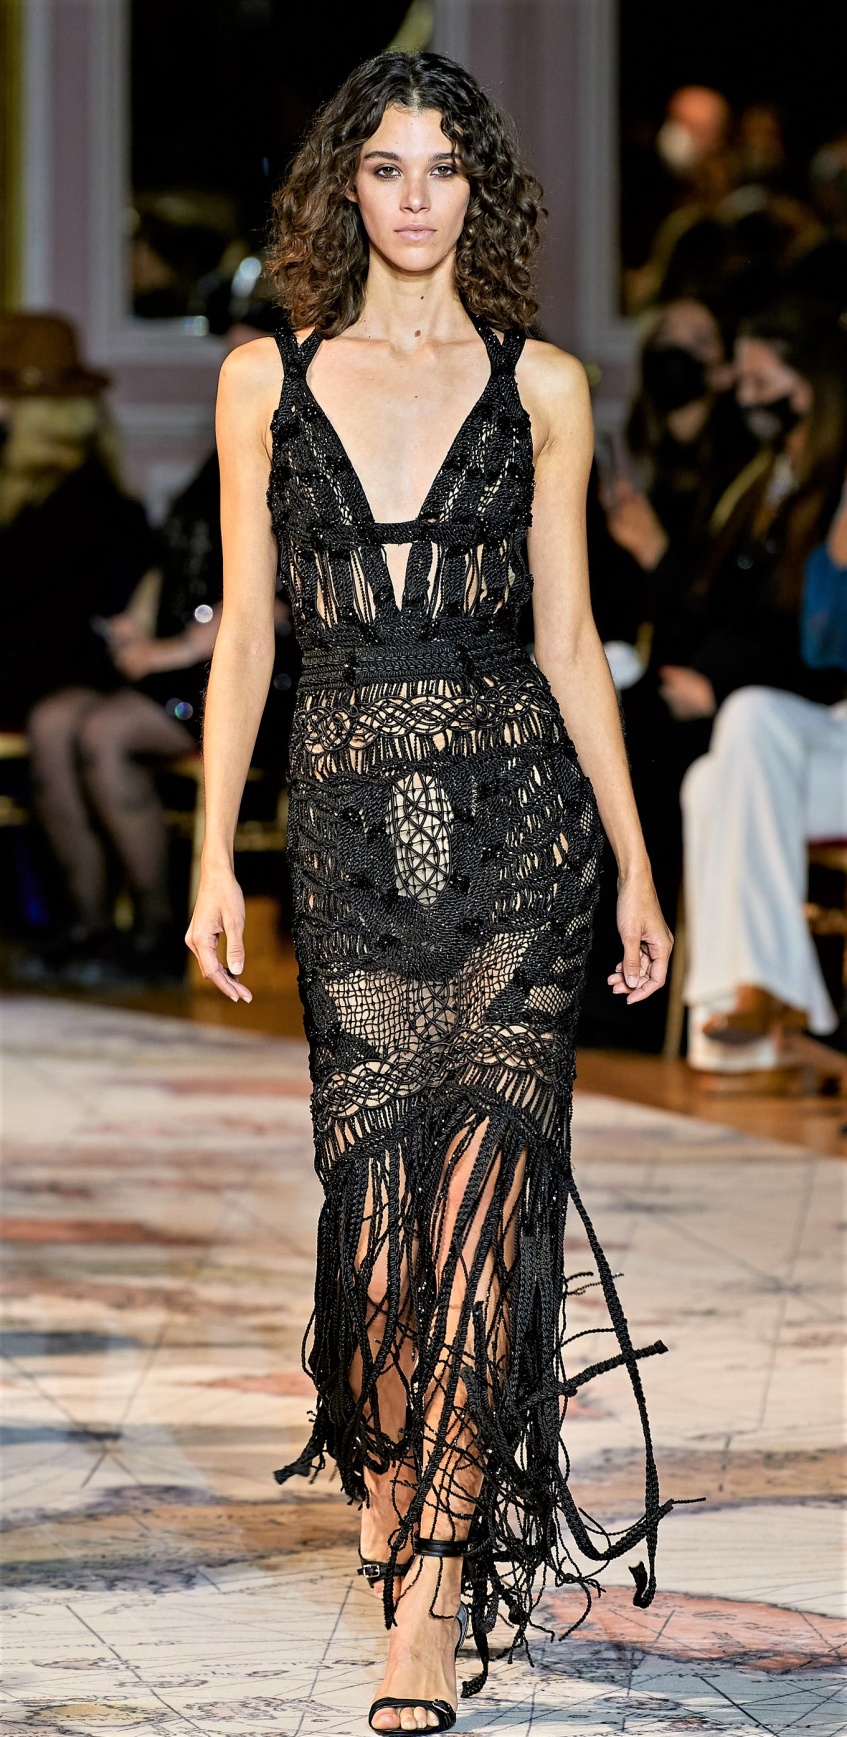 Couture 1-22 Zuh blk lace cropped.jpg